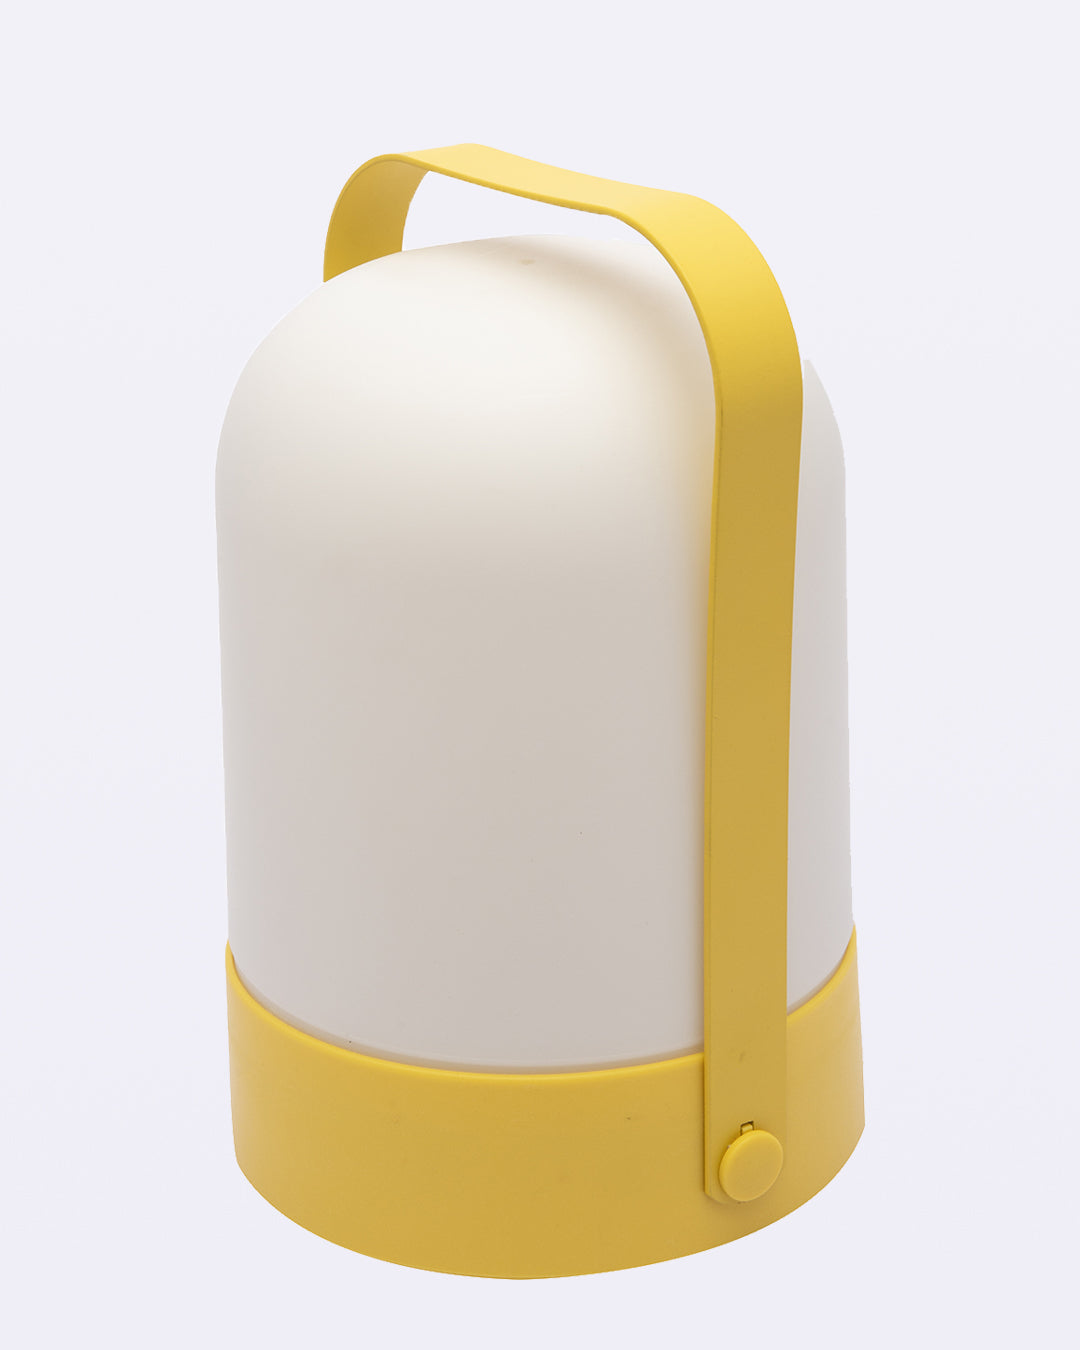 VON CASA Decorative Lantern, Lamp, Battery Operated, for Outdoor & Indoor Hanging, Table Decoration, Yellow, Plastic